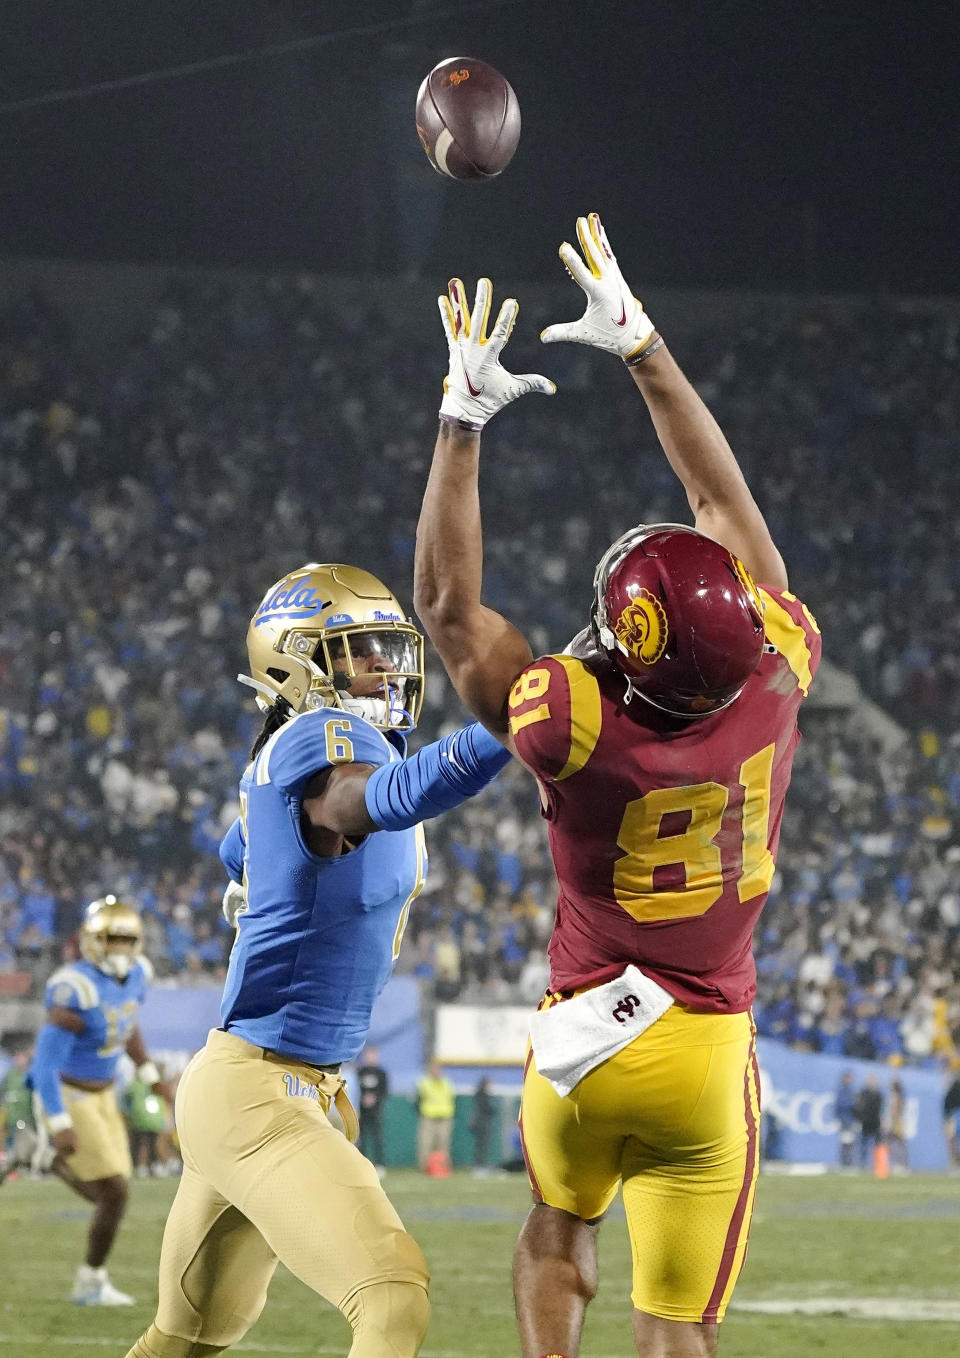 Southern California wide receiver Kyle Ford, right, catches a touchdown pass as UCLA defensive back John Humphrey defends during the second half of an NCAA college football game Saturday, Nov. 19, 2022, in Pasadena, Calif. (AP Photo/Mark J. Terrill)